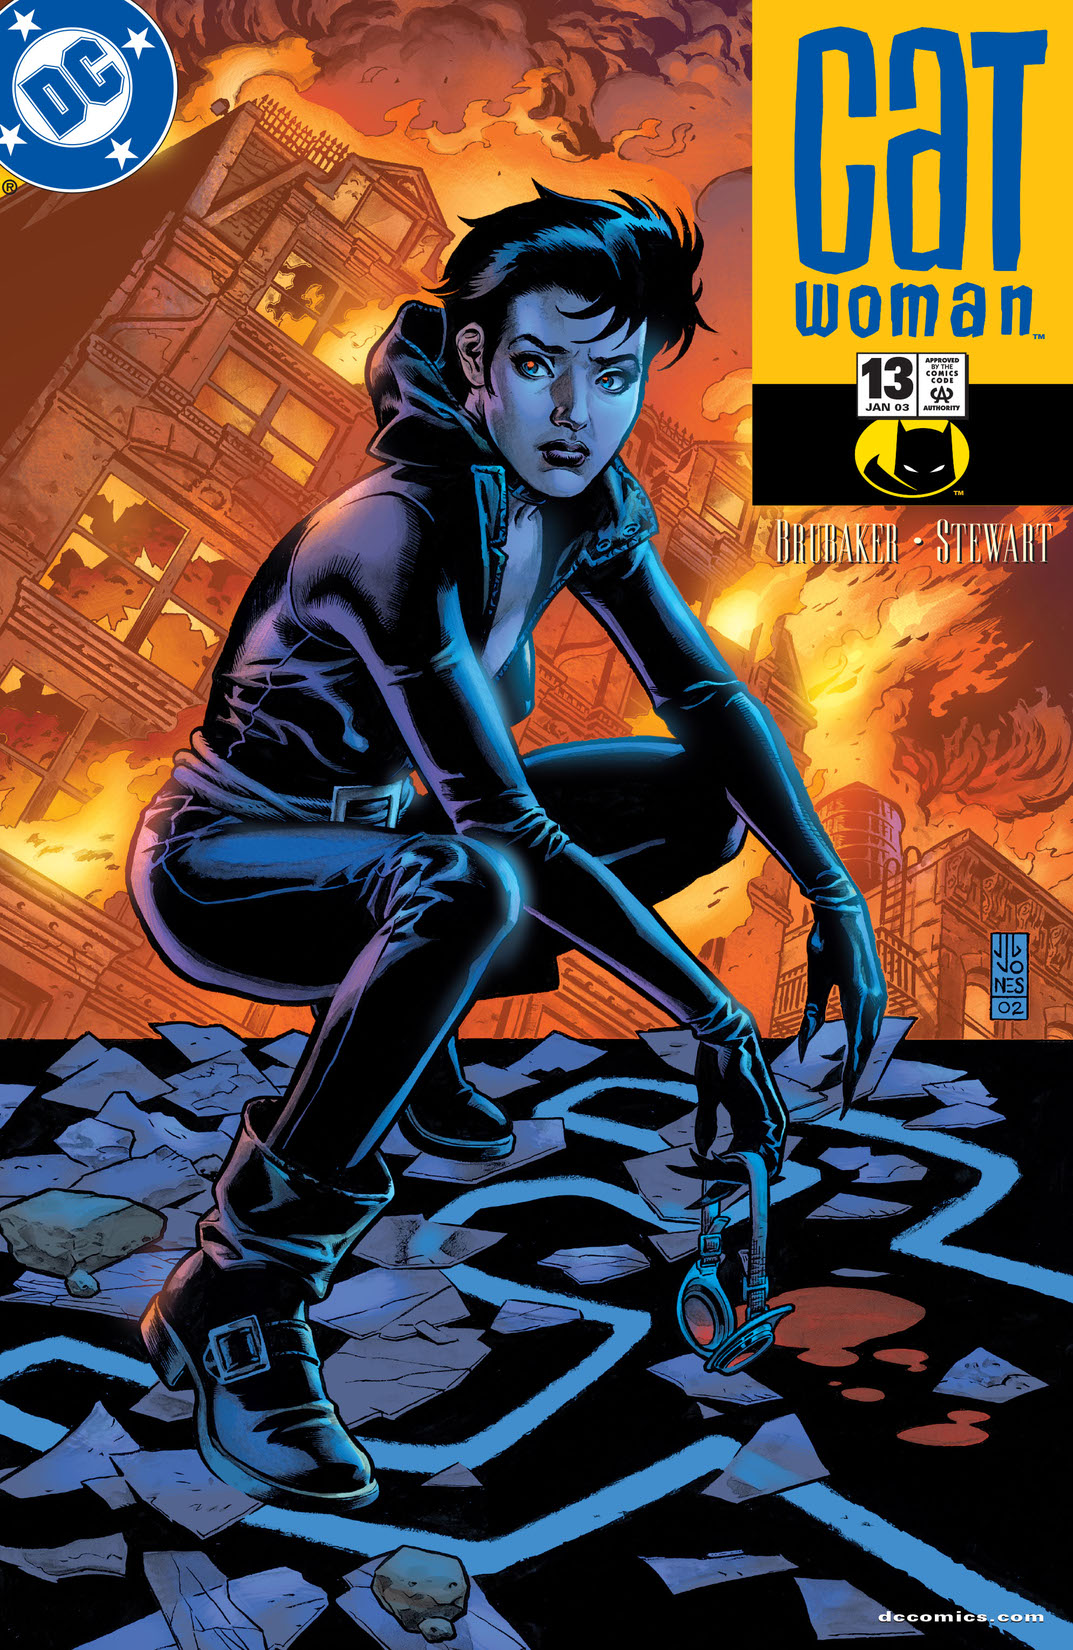 Catwoman (2001-) #13 preview images